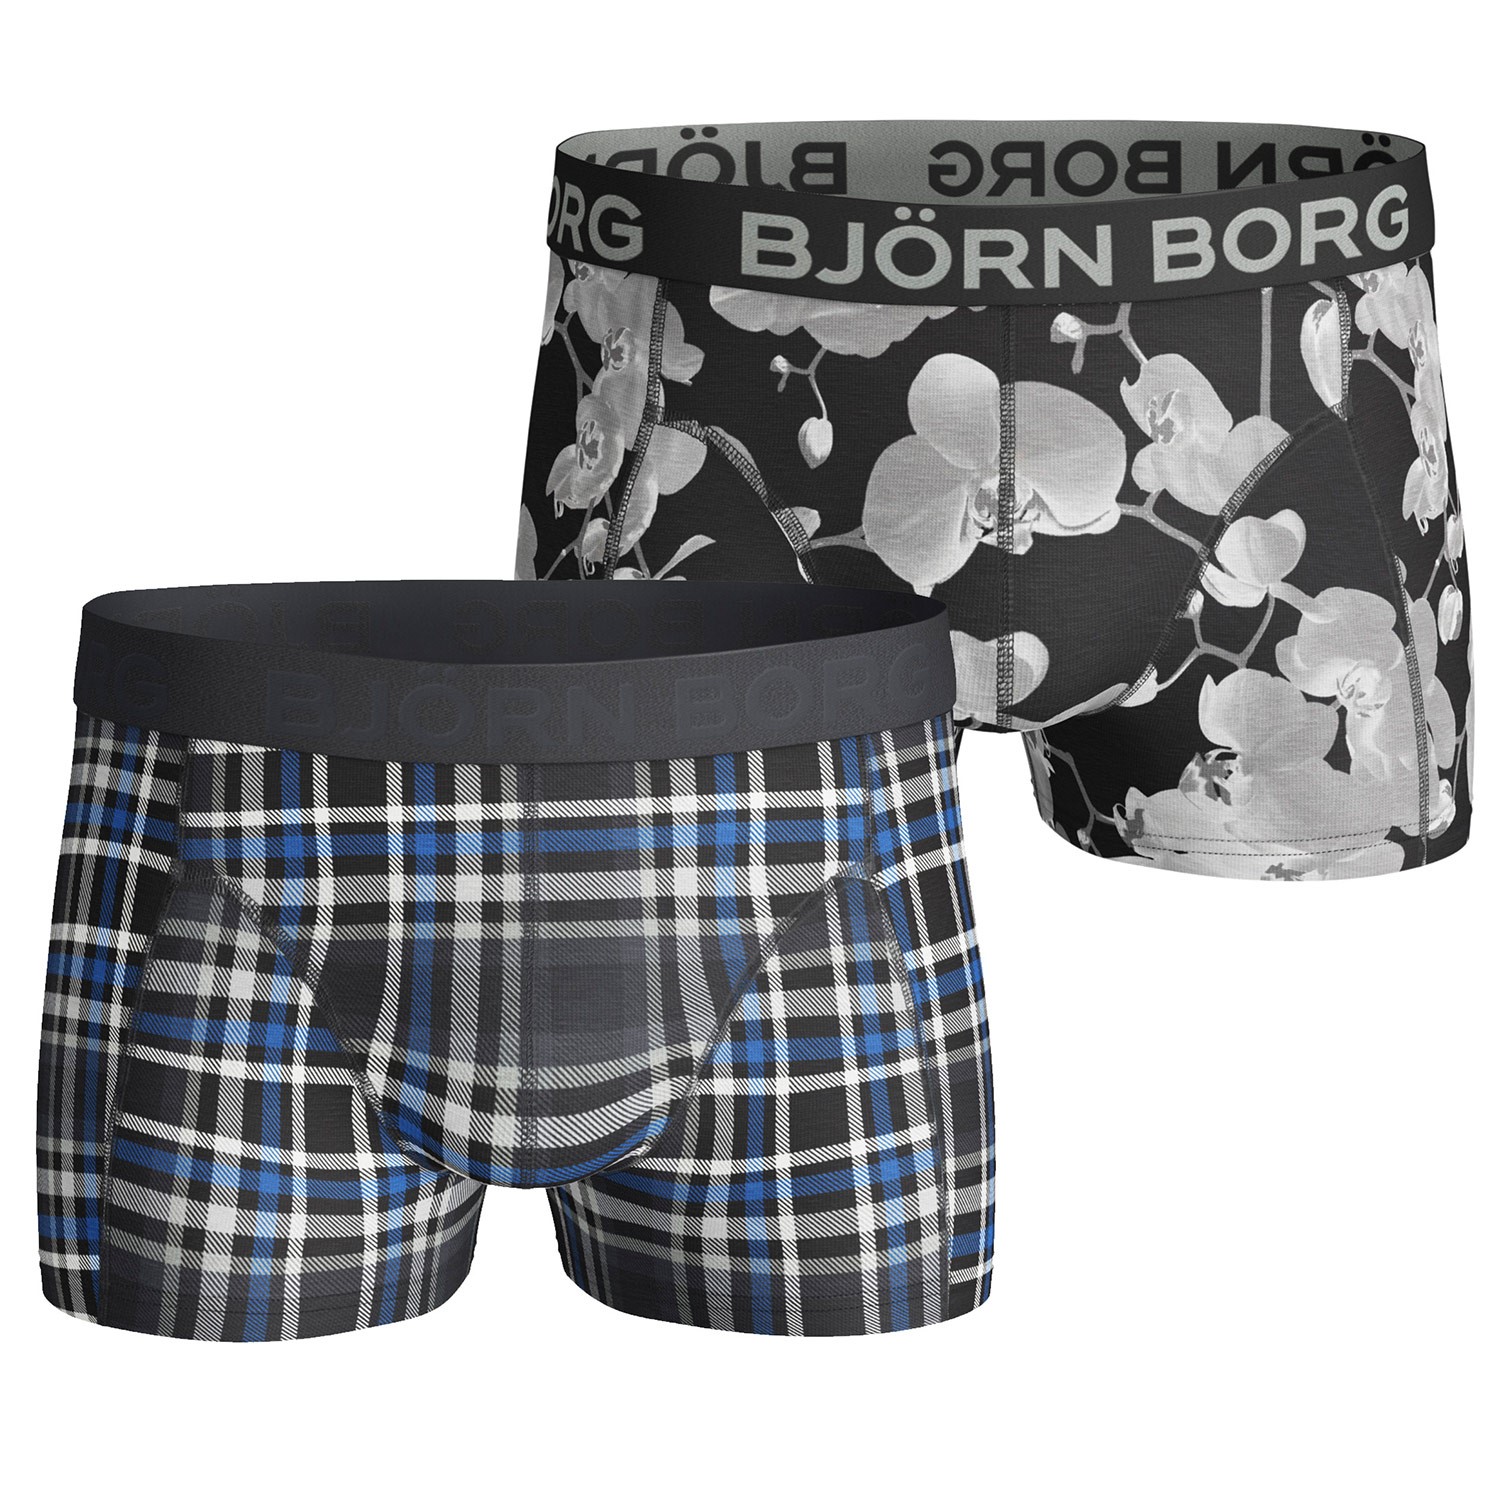 Björn Borg Short Shorts Check and Toxic Orchid